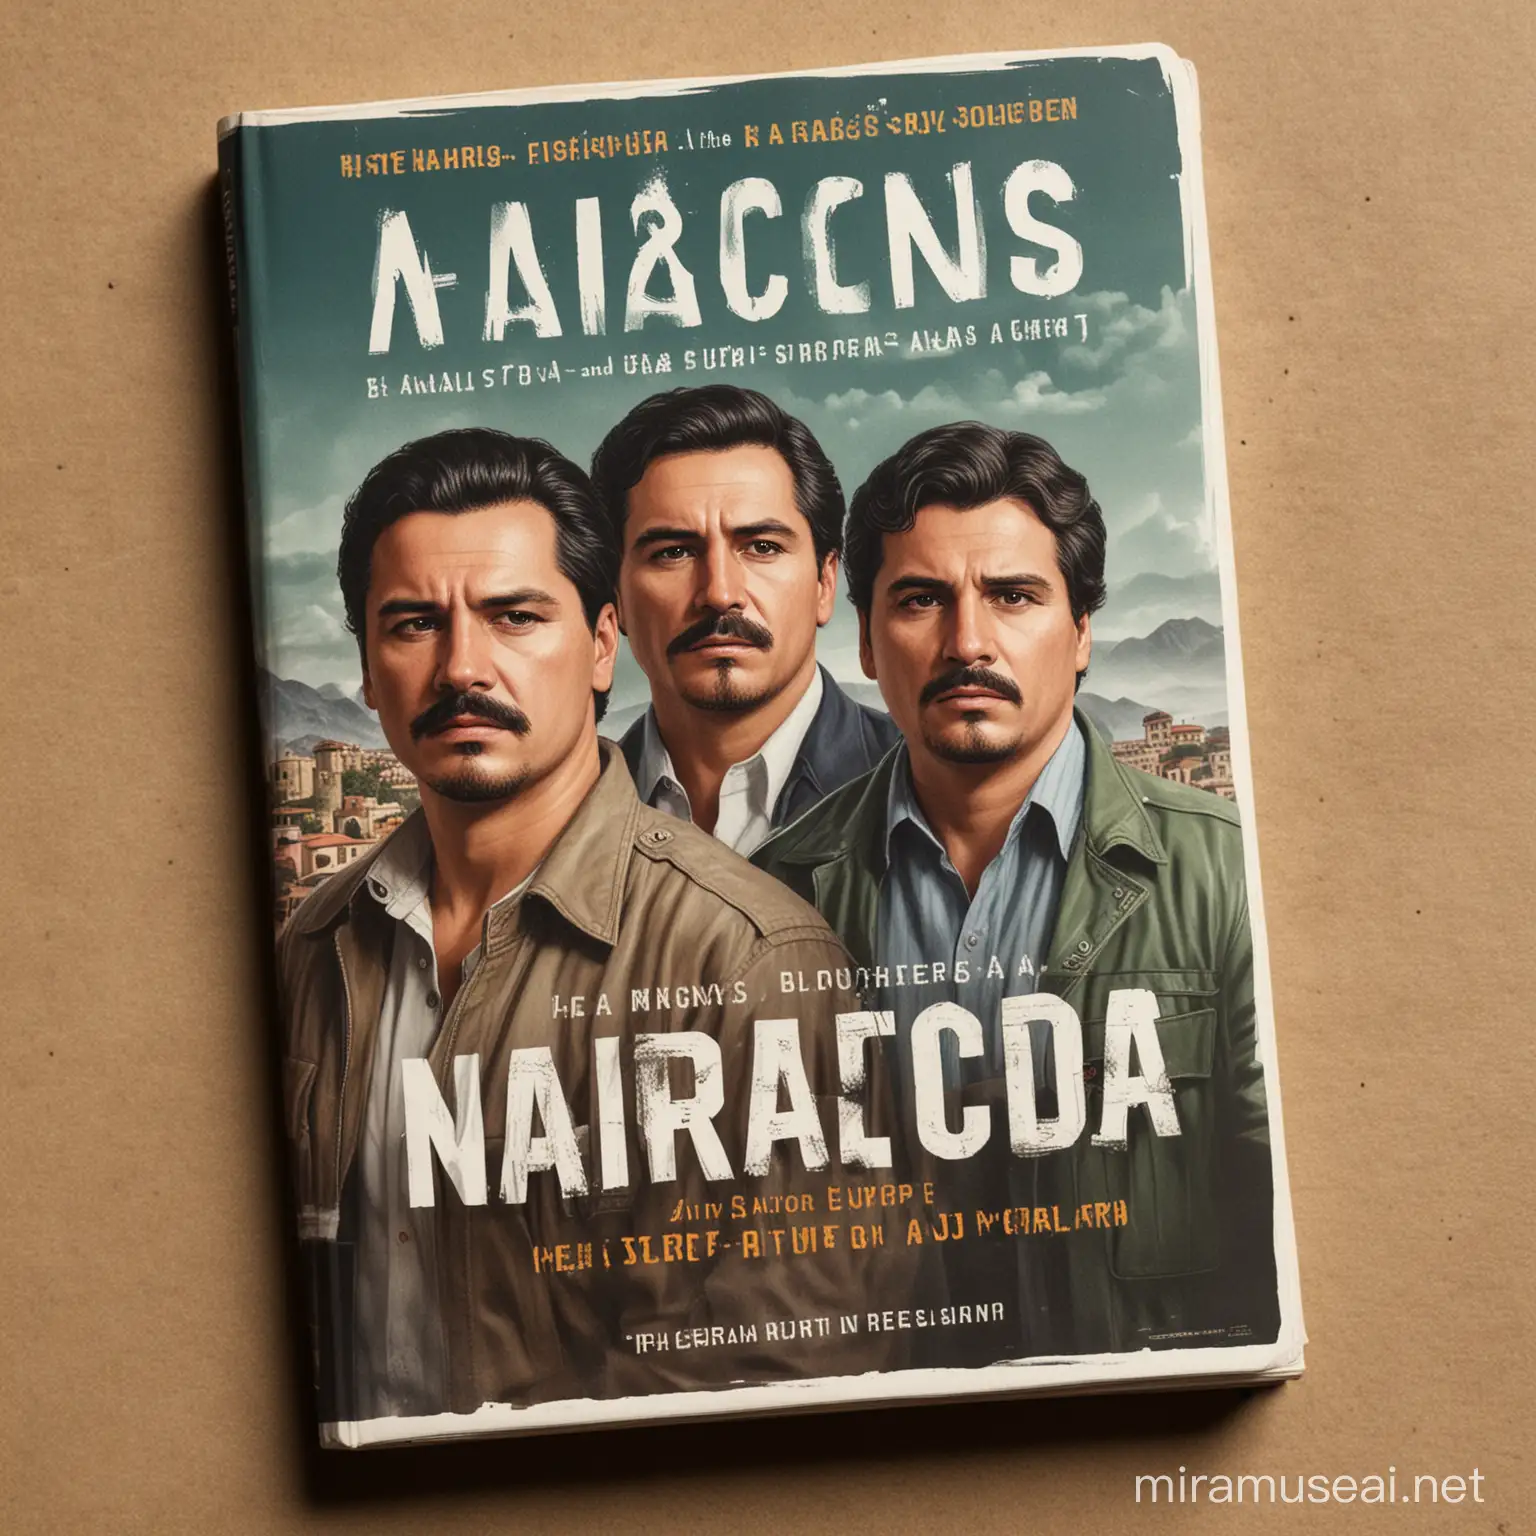 Narcos in Europe Tale of Two Brothers and a DEA Agent